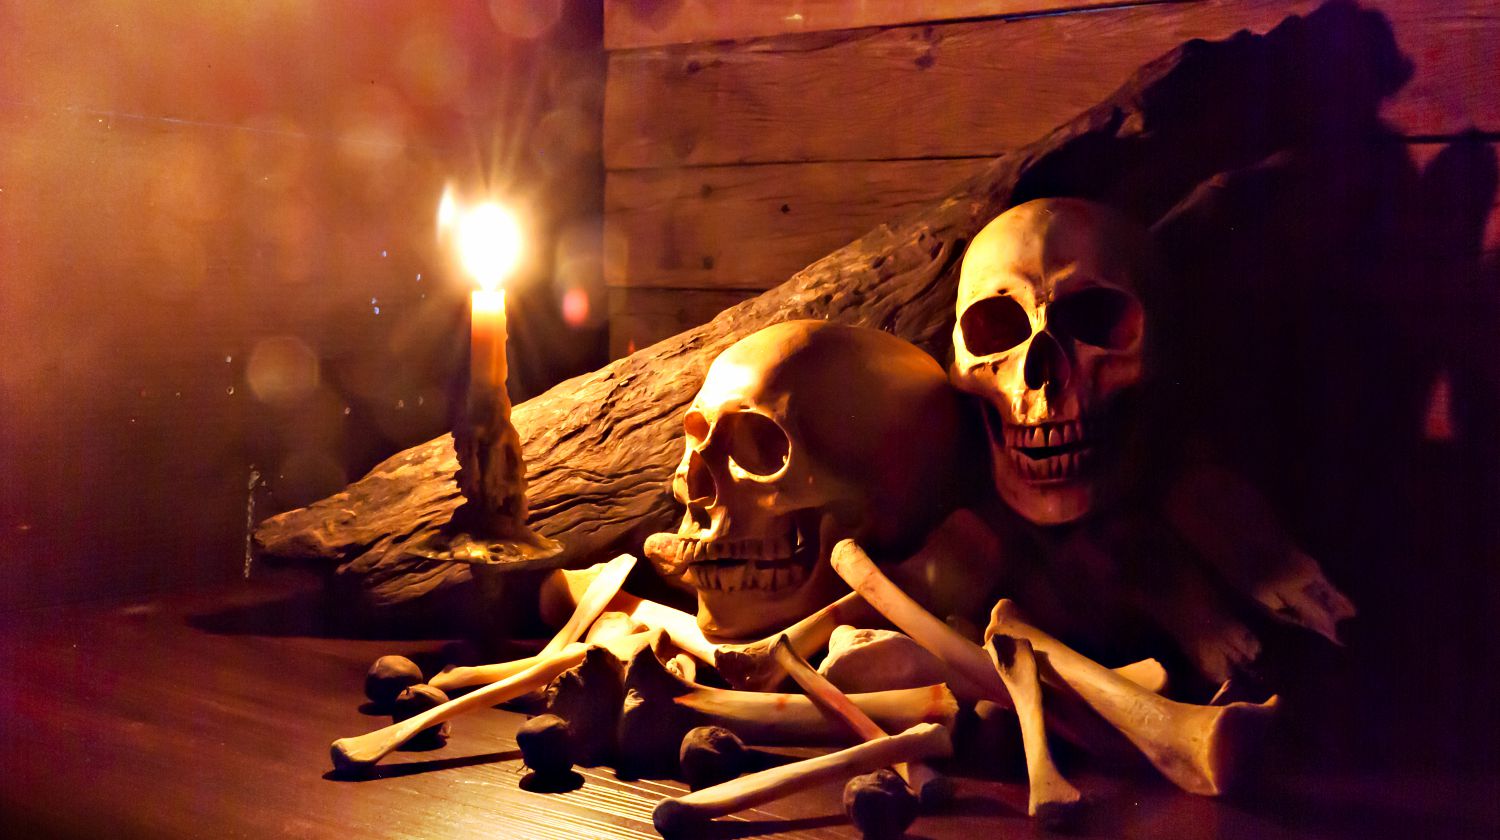 Candle lighting of skulls and bones pile with candle on wooden floor and old dirty wall | DIY Halloween Skull And Bones For Decorations | Featured